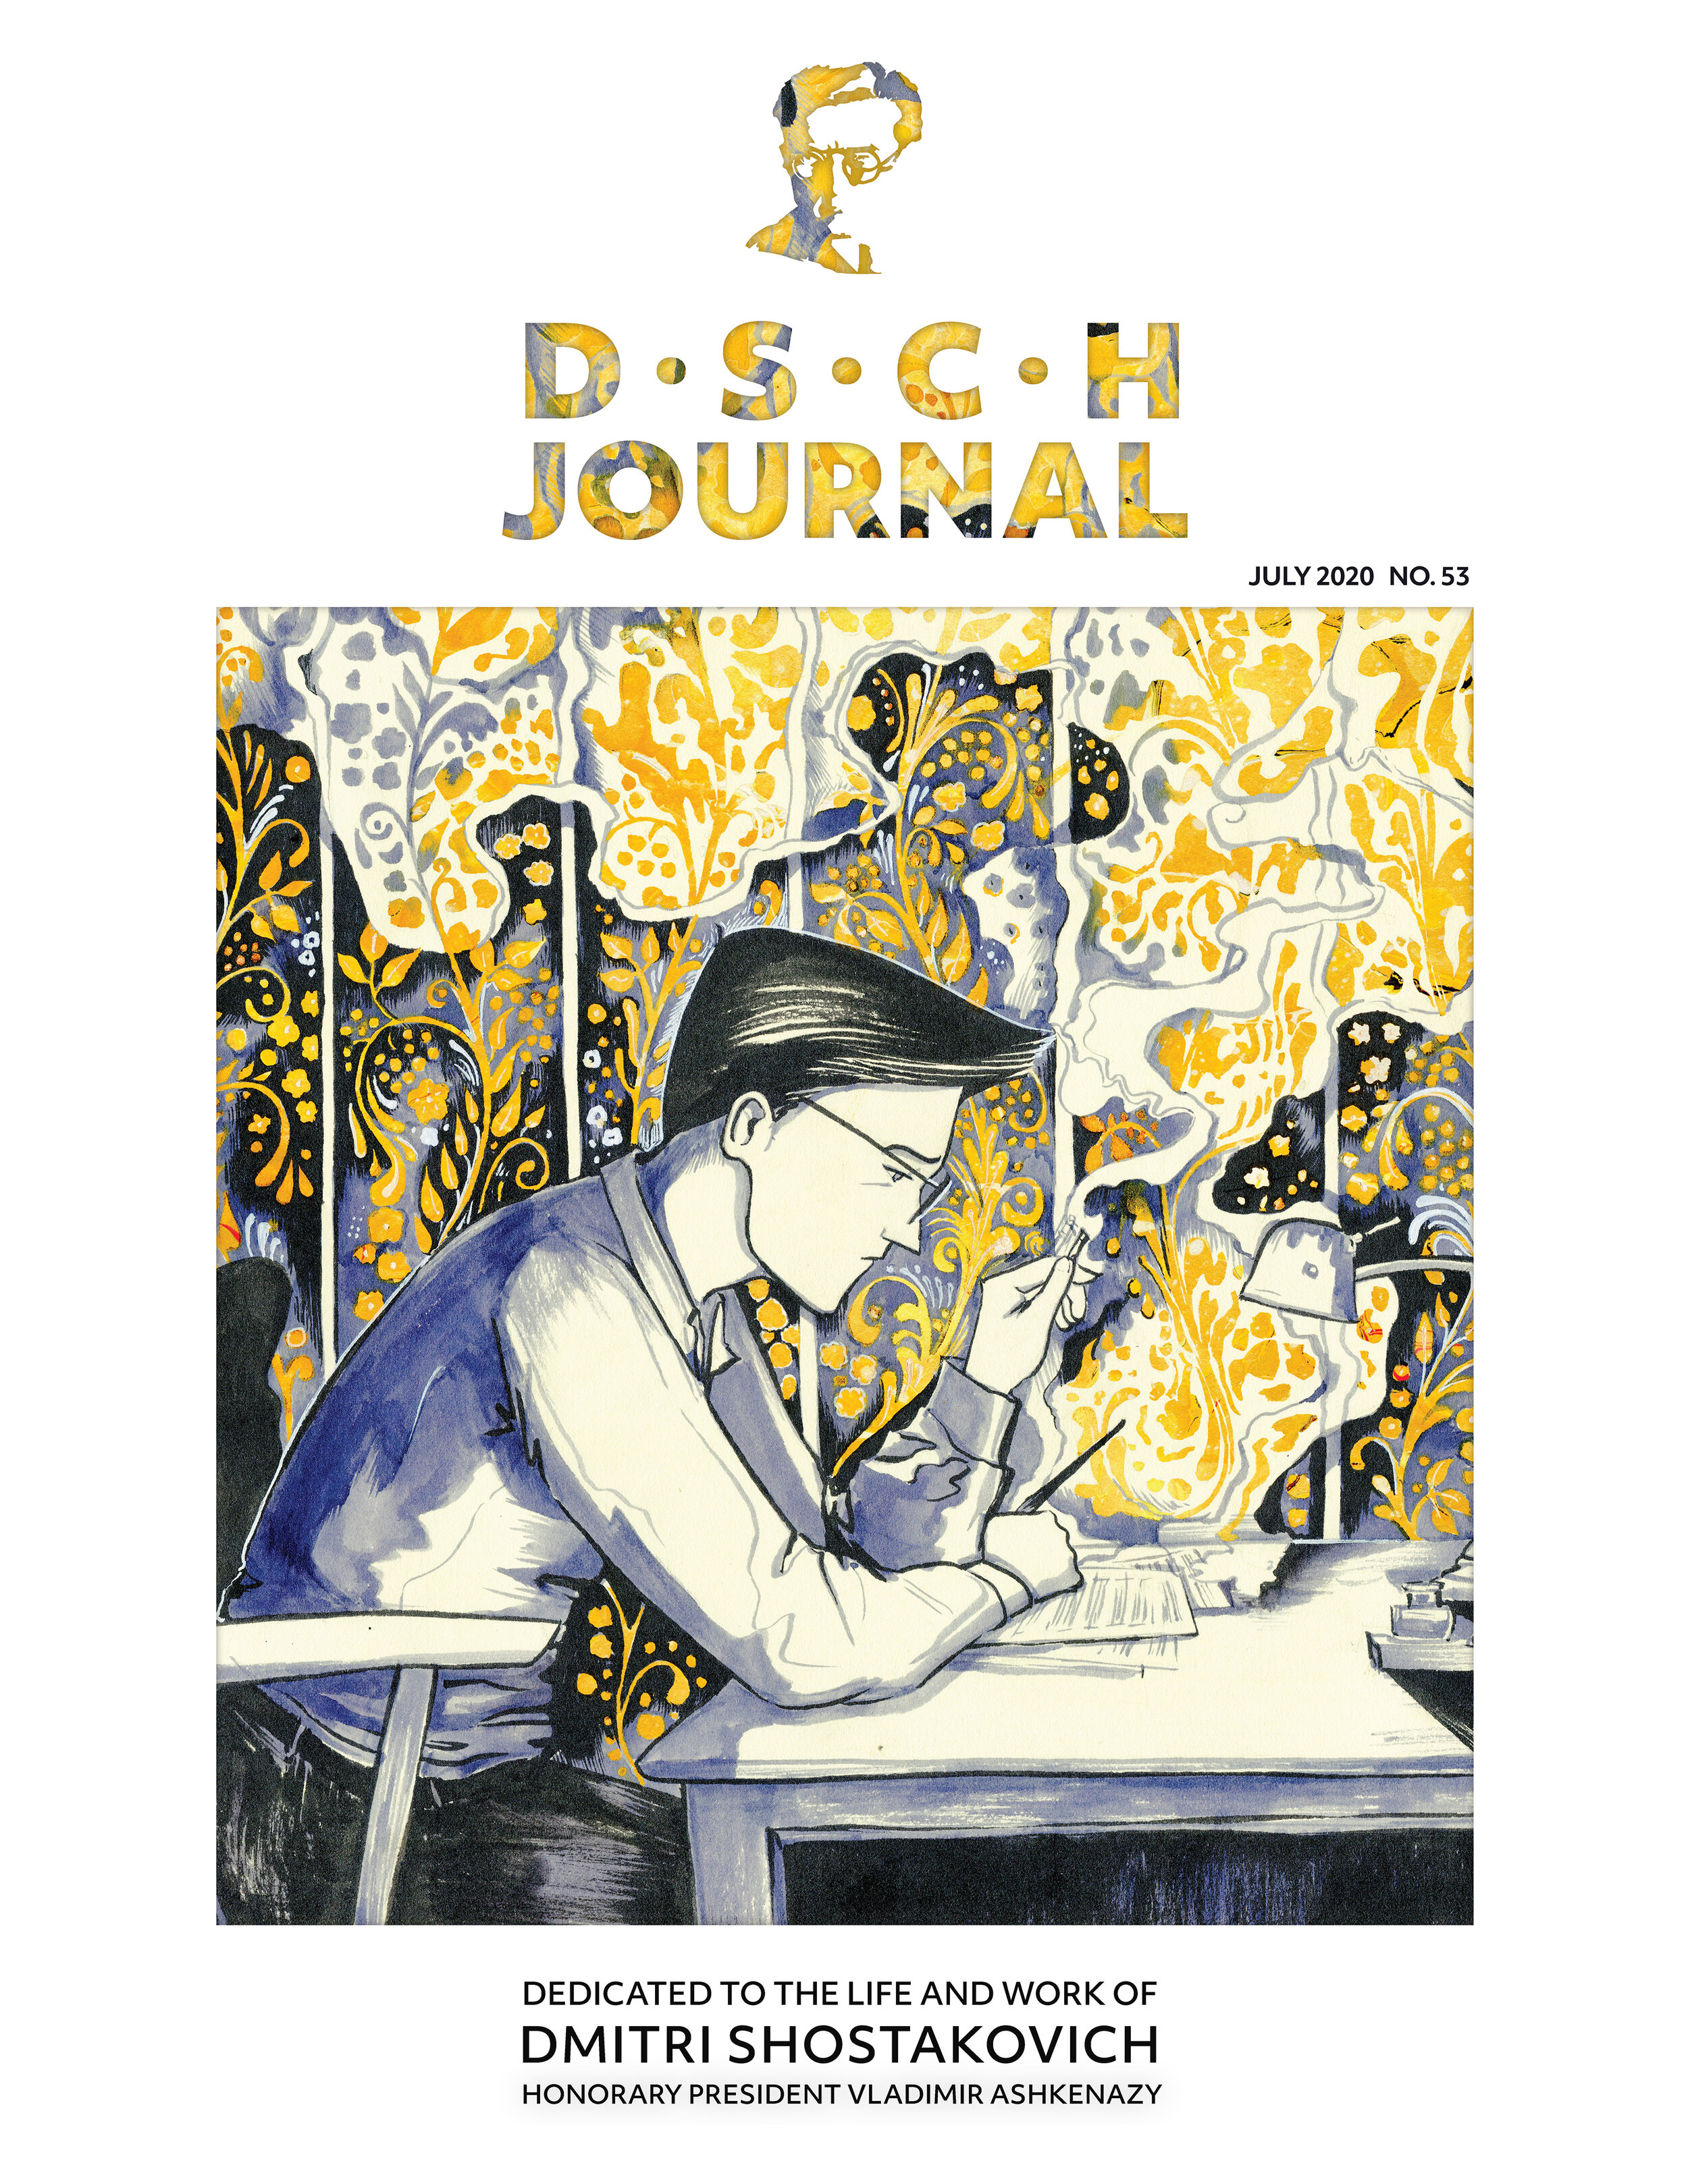 DSCH Journal Cover - Issue 53